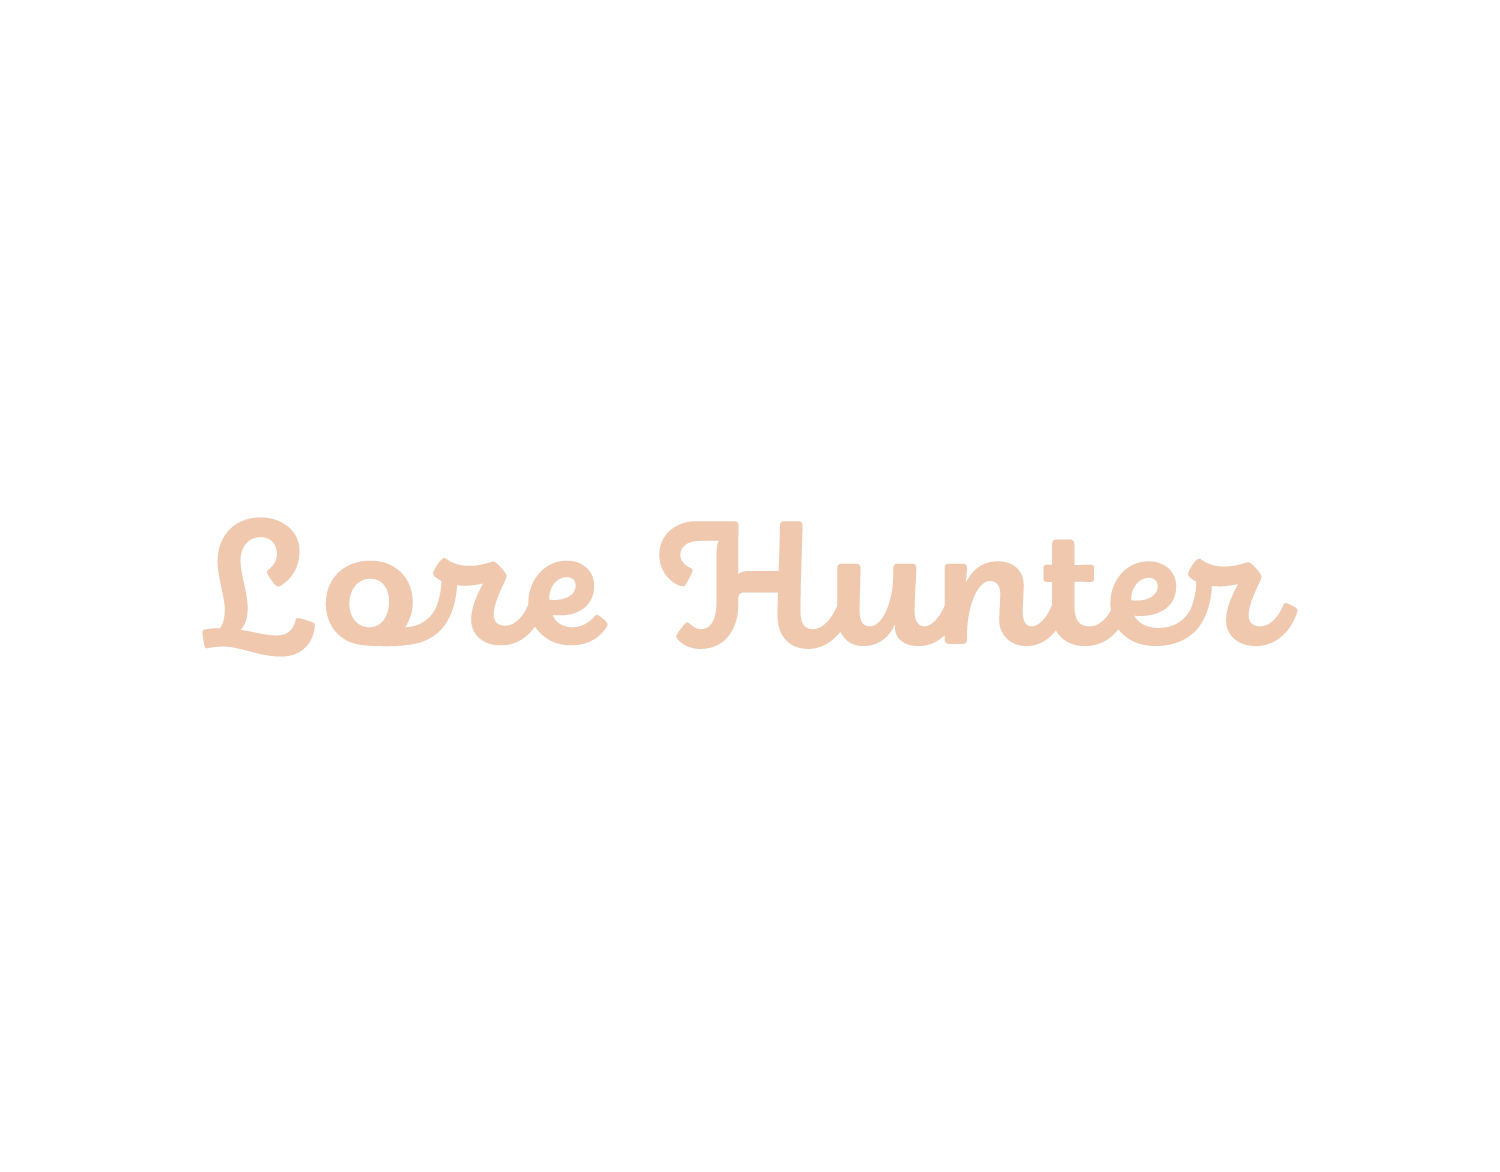 This cursive, tan logo 
				contains the words Lore Hunter.